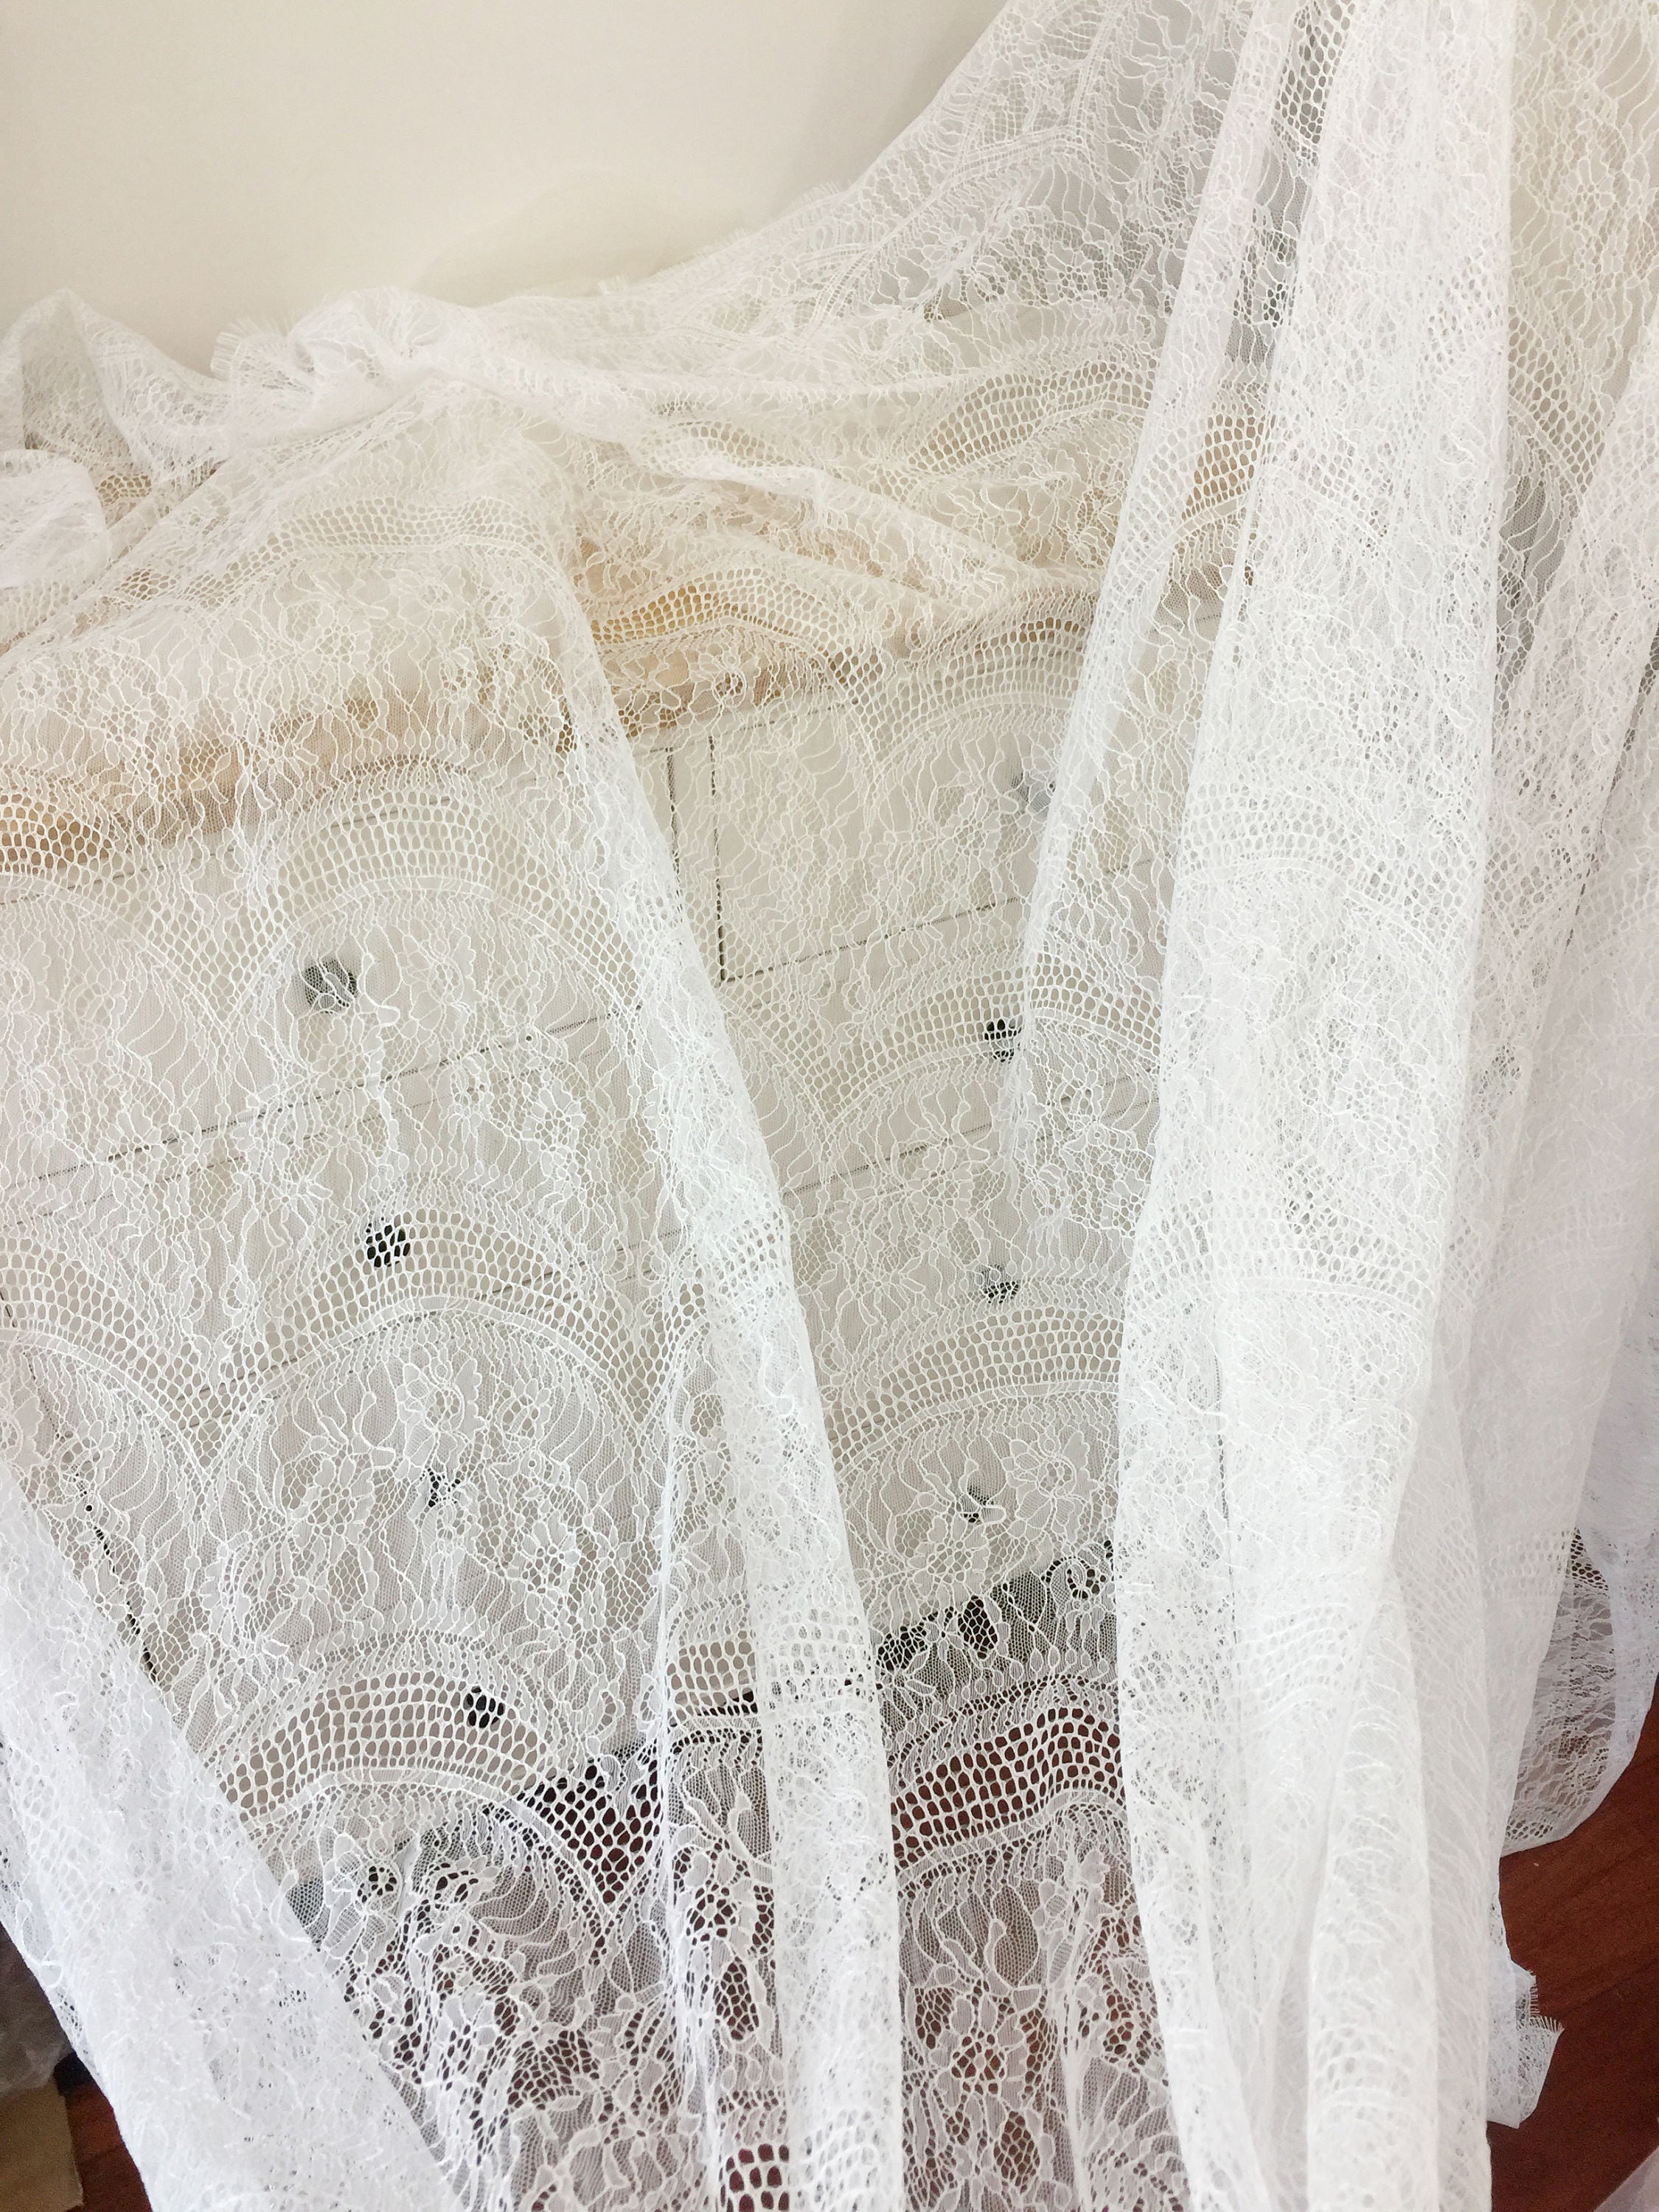 3 METER PIECE Bridal Chantilly Lace Fabric Lingerie Lace - Etsy